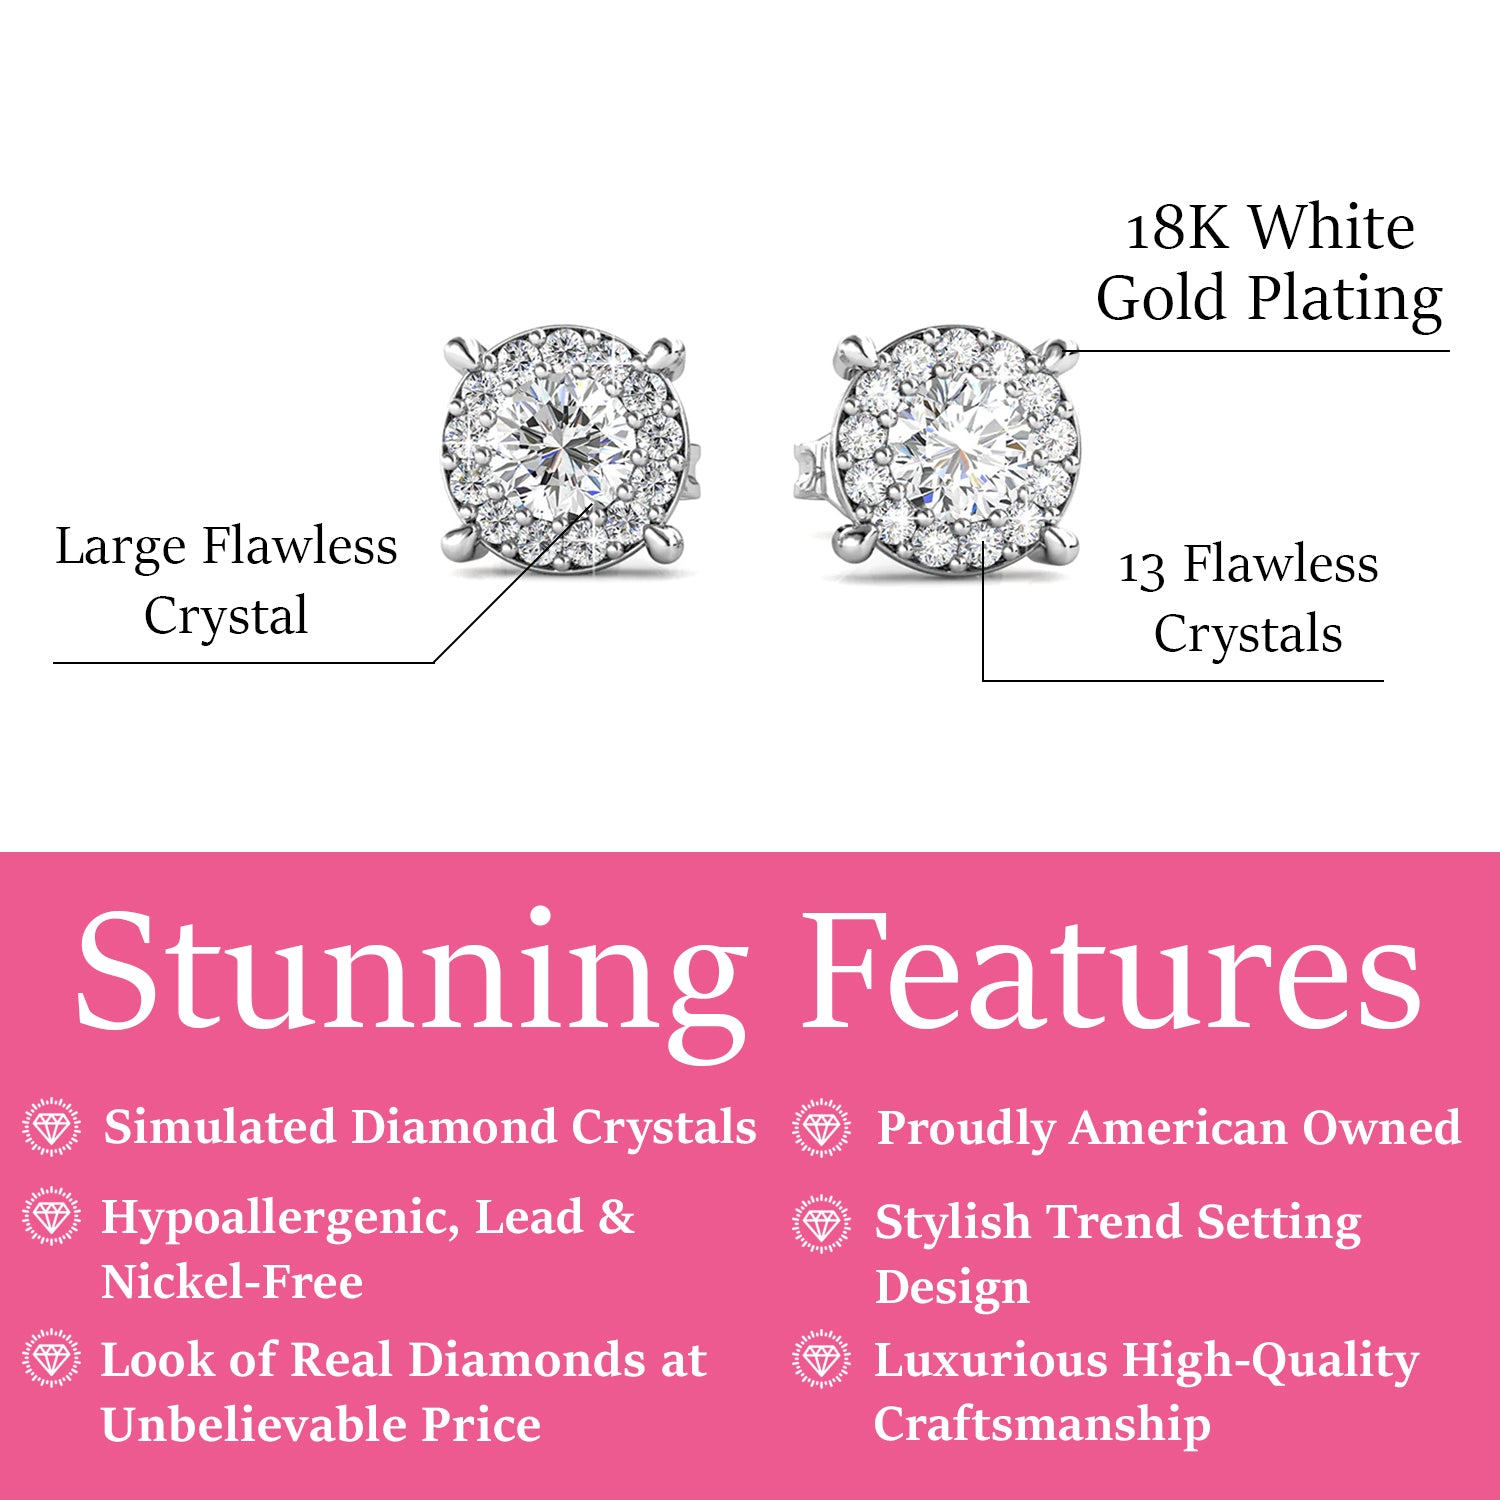 Raylee 18k White Gold Plated Necklace and Earrings Jewelry Set with Round Cut Solitaire Swarovski Crystal